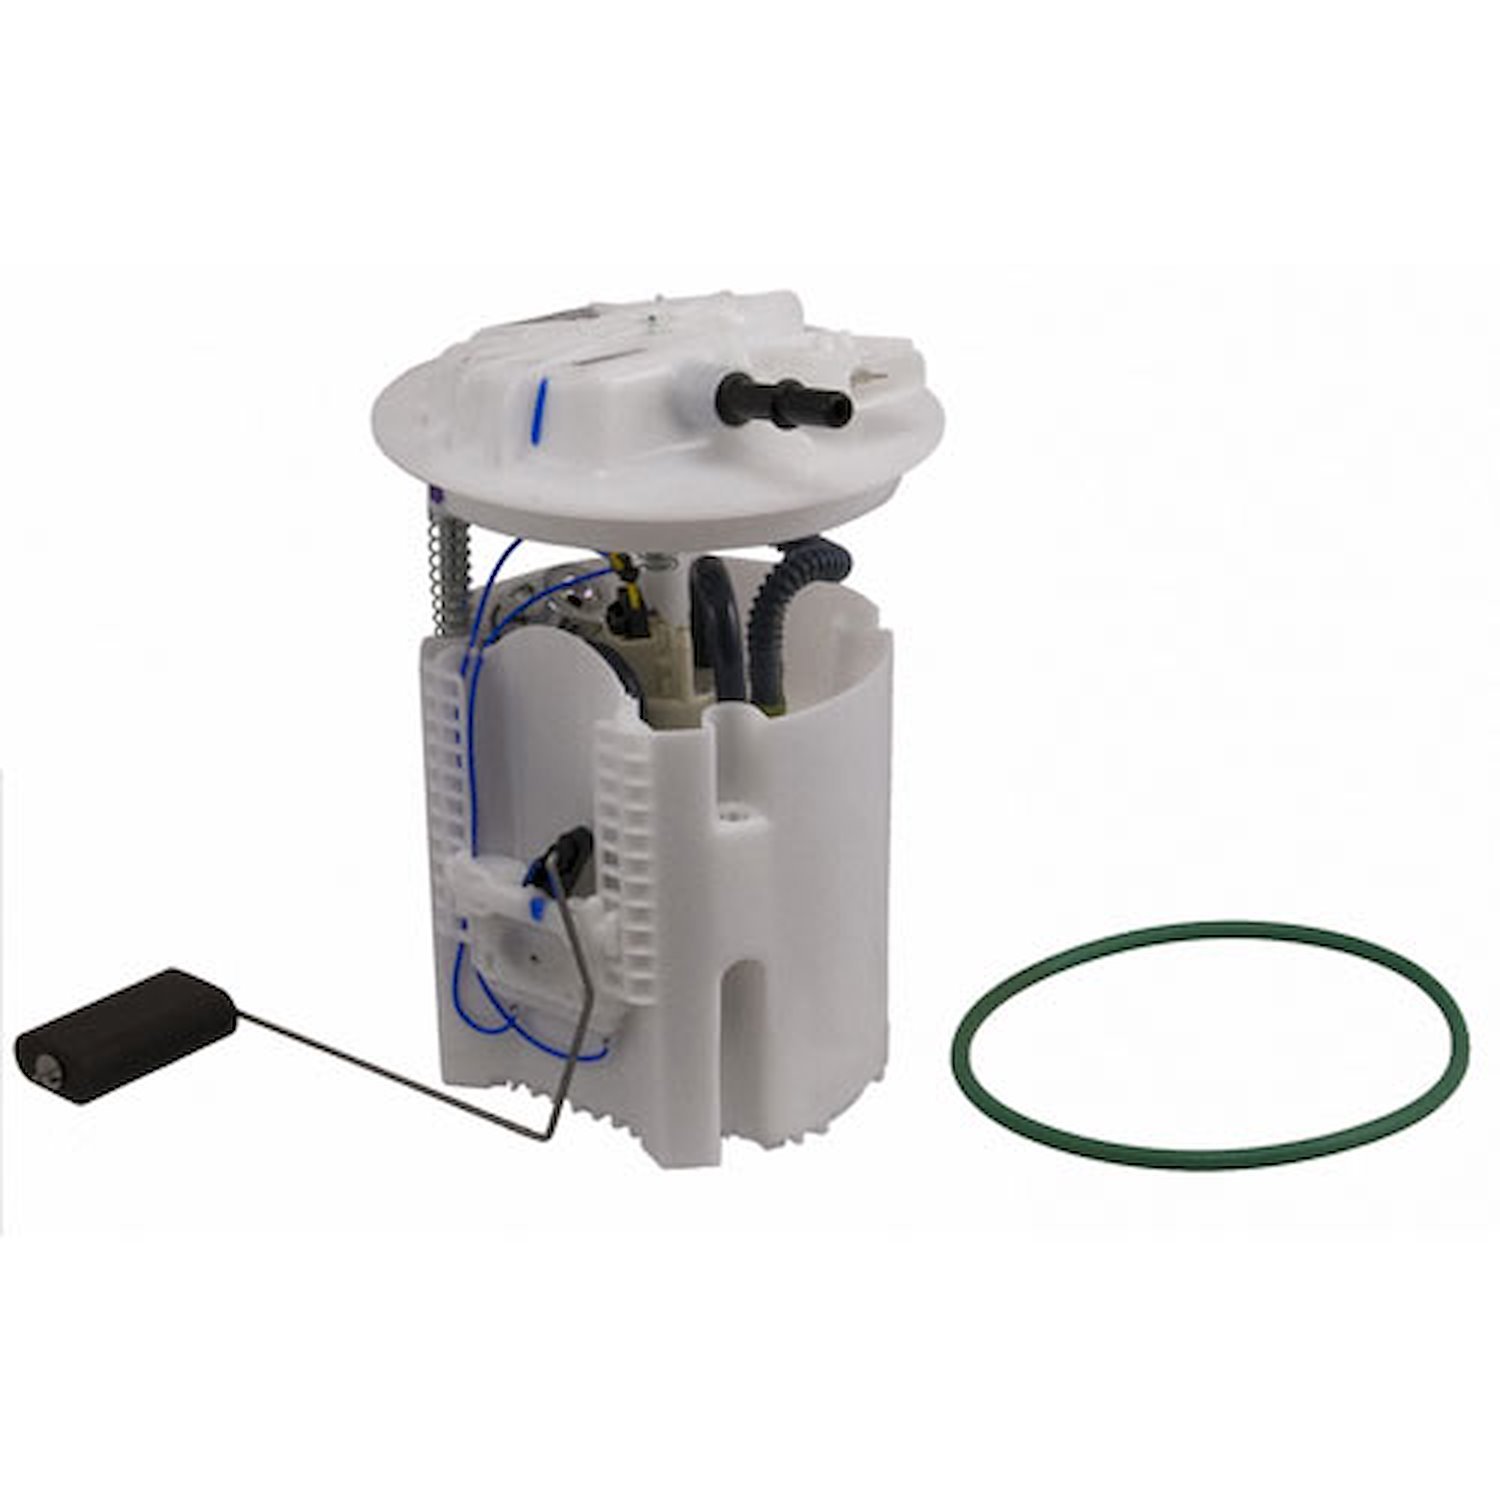 OE Chrysler/Dodge Replacement Electric Fuel Pump Module Assembly 2009 Dodge Caliber 2.4L 4 Cyl